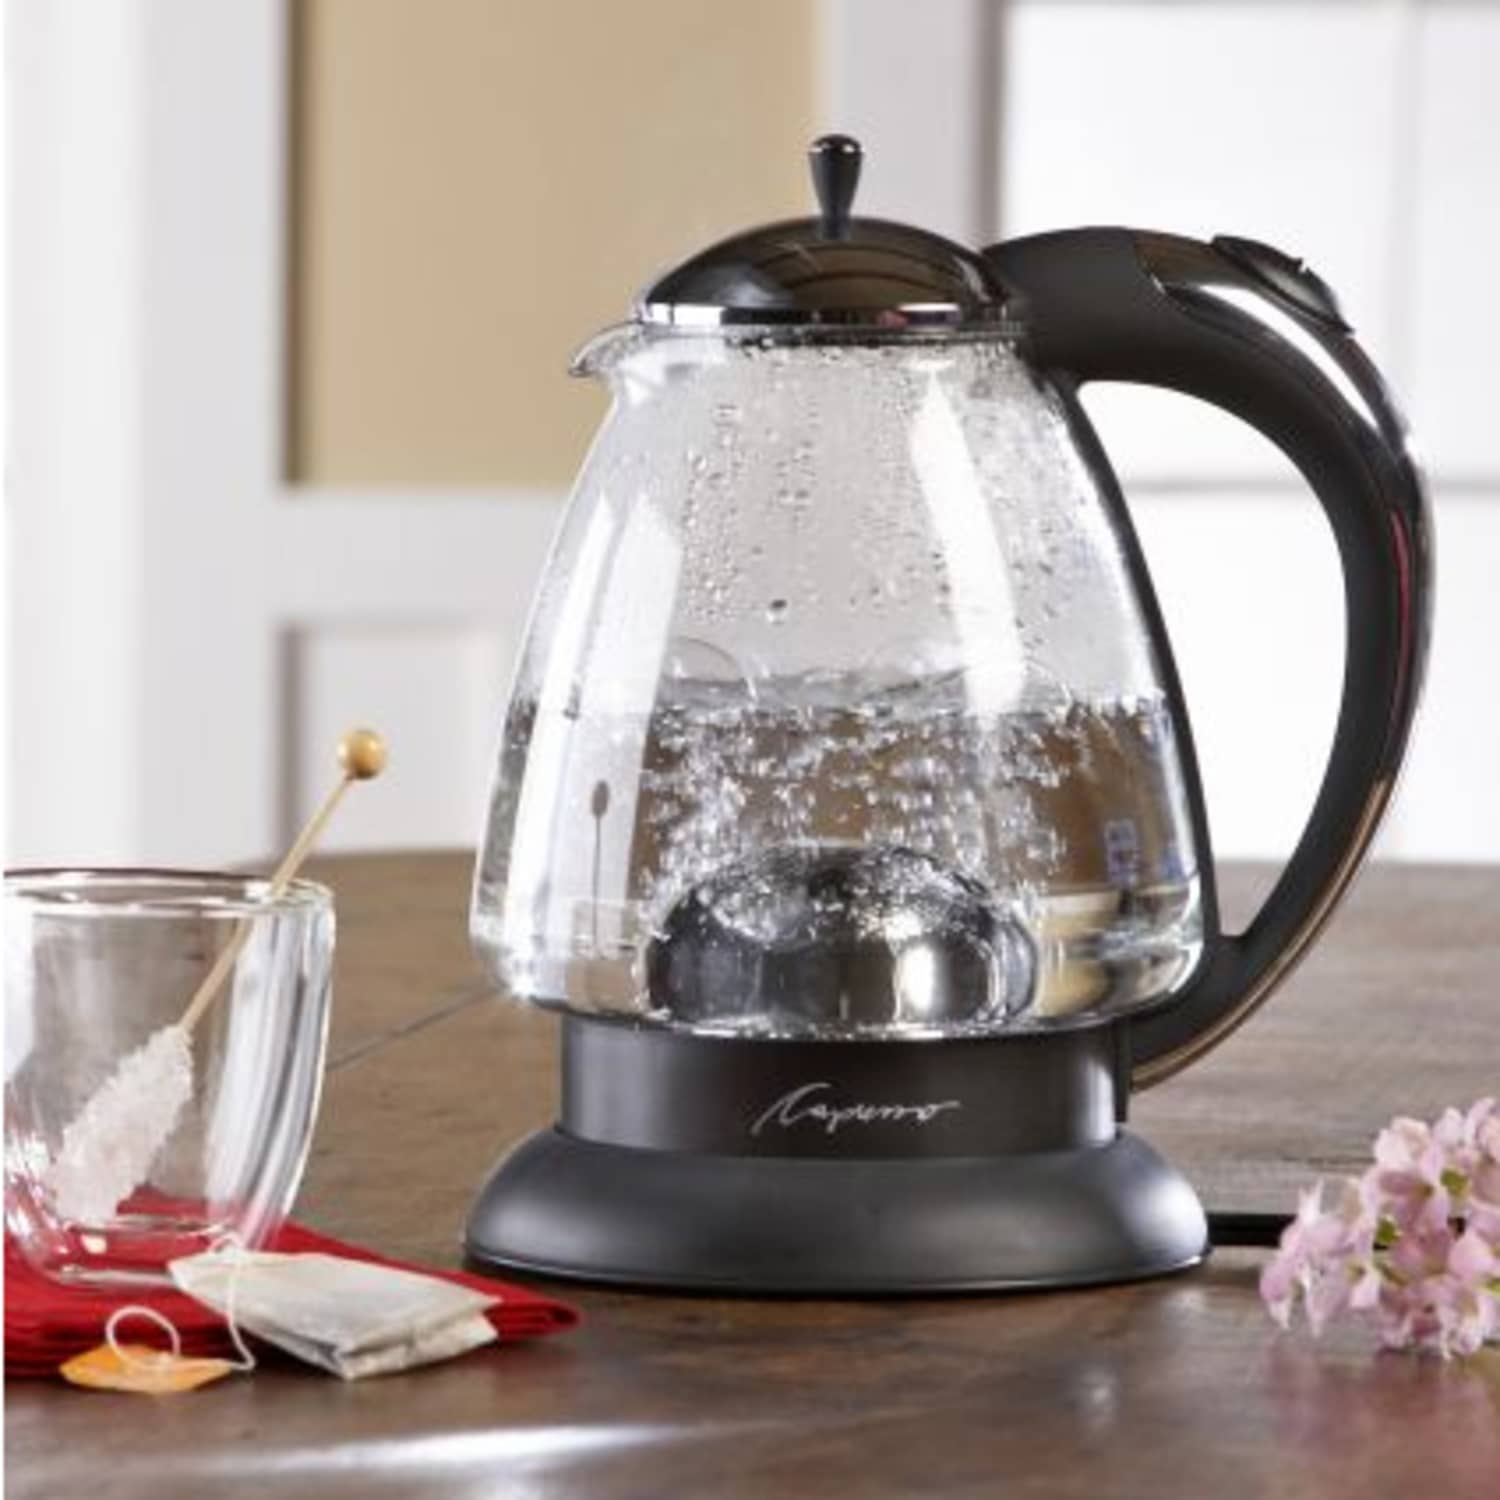 Electric Kettles: Should You Buy One?